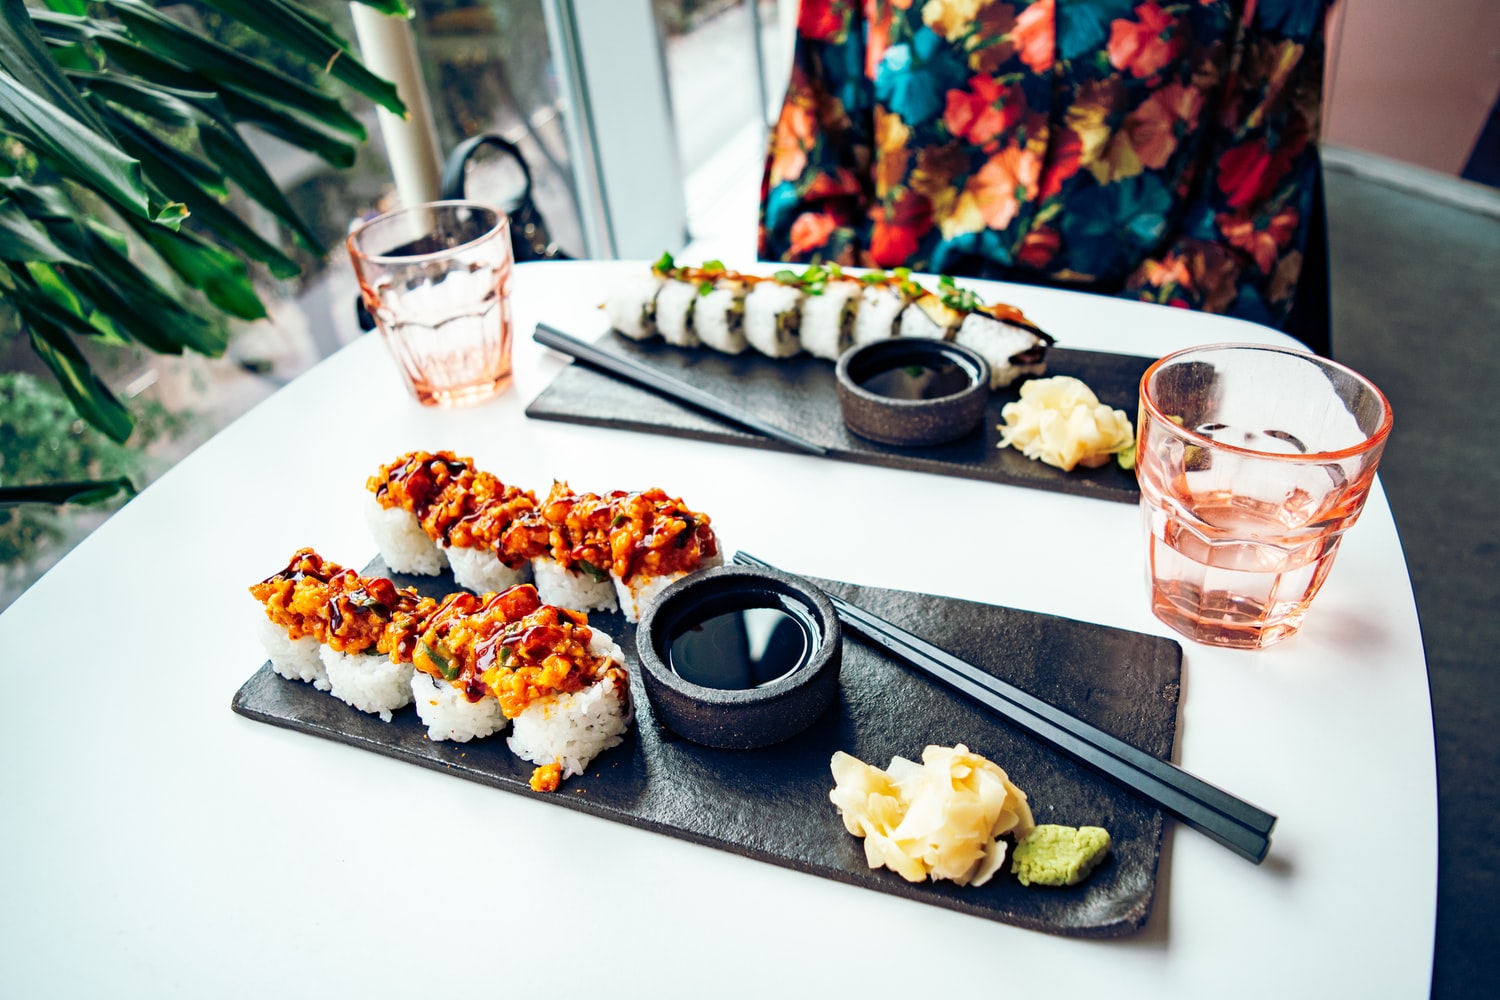 Dining near Upper Ivy: The best sushi bars in Culver City